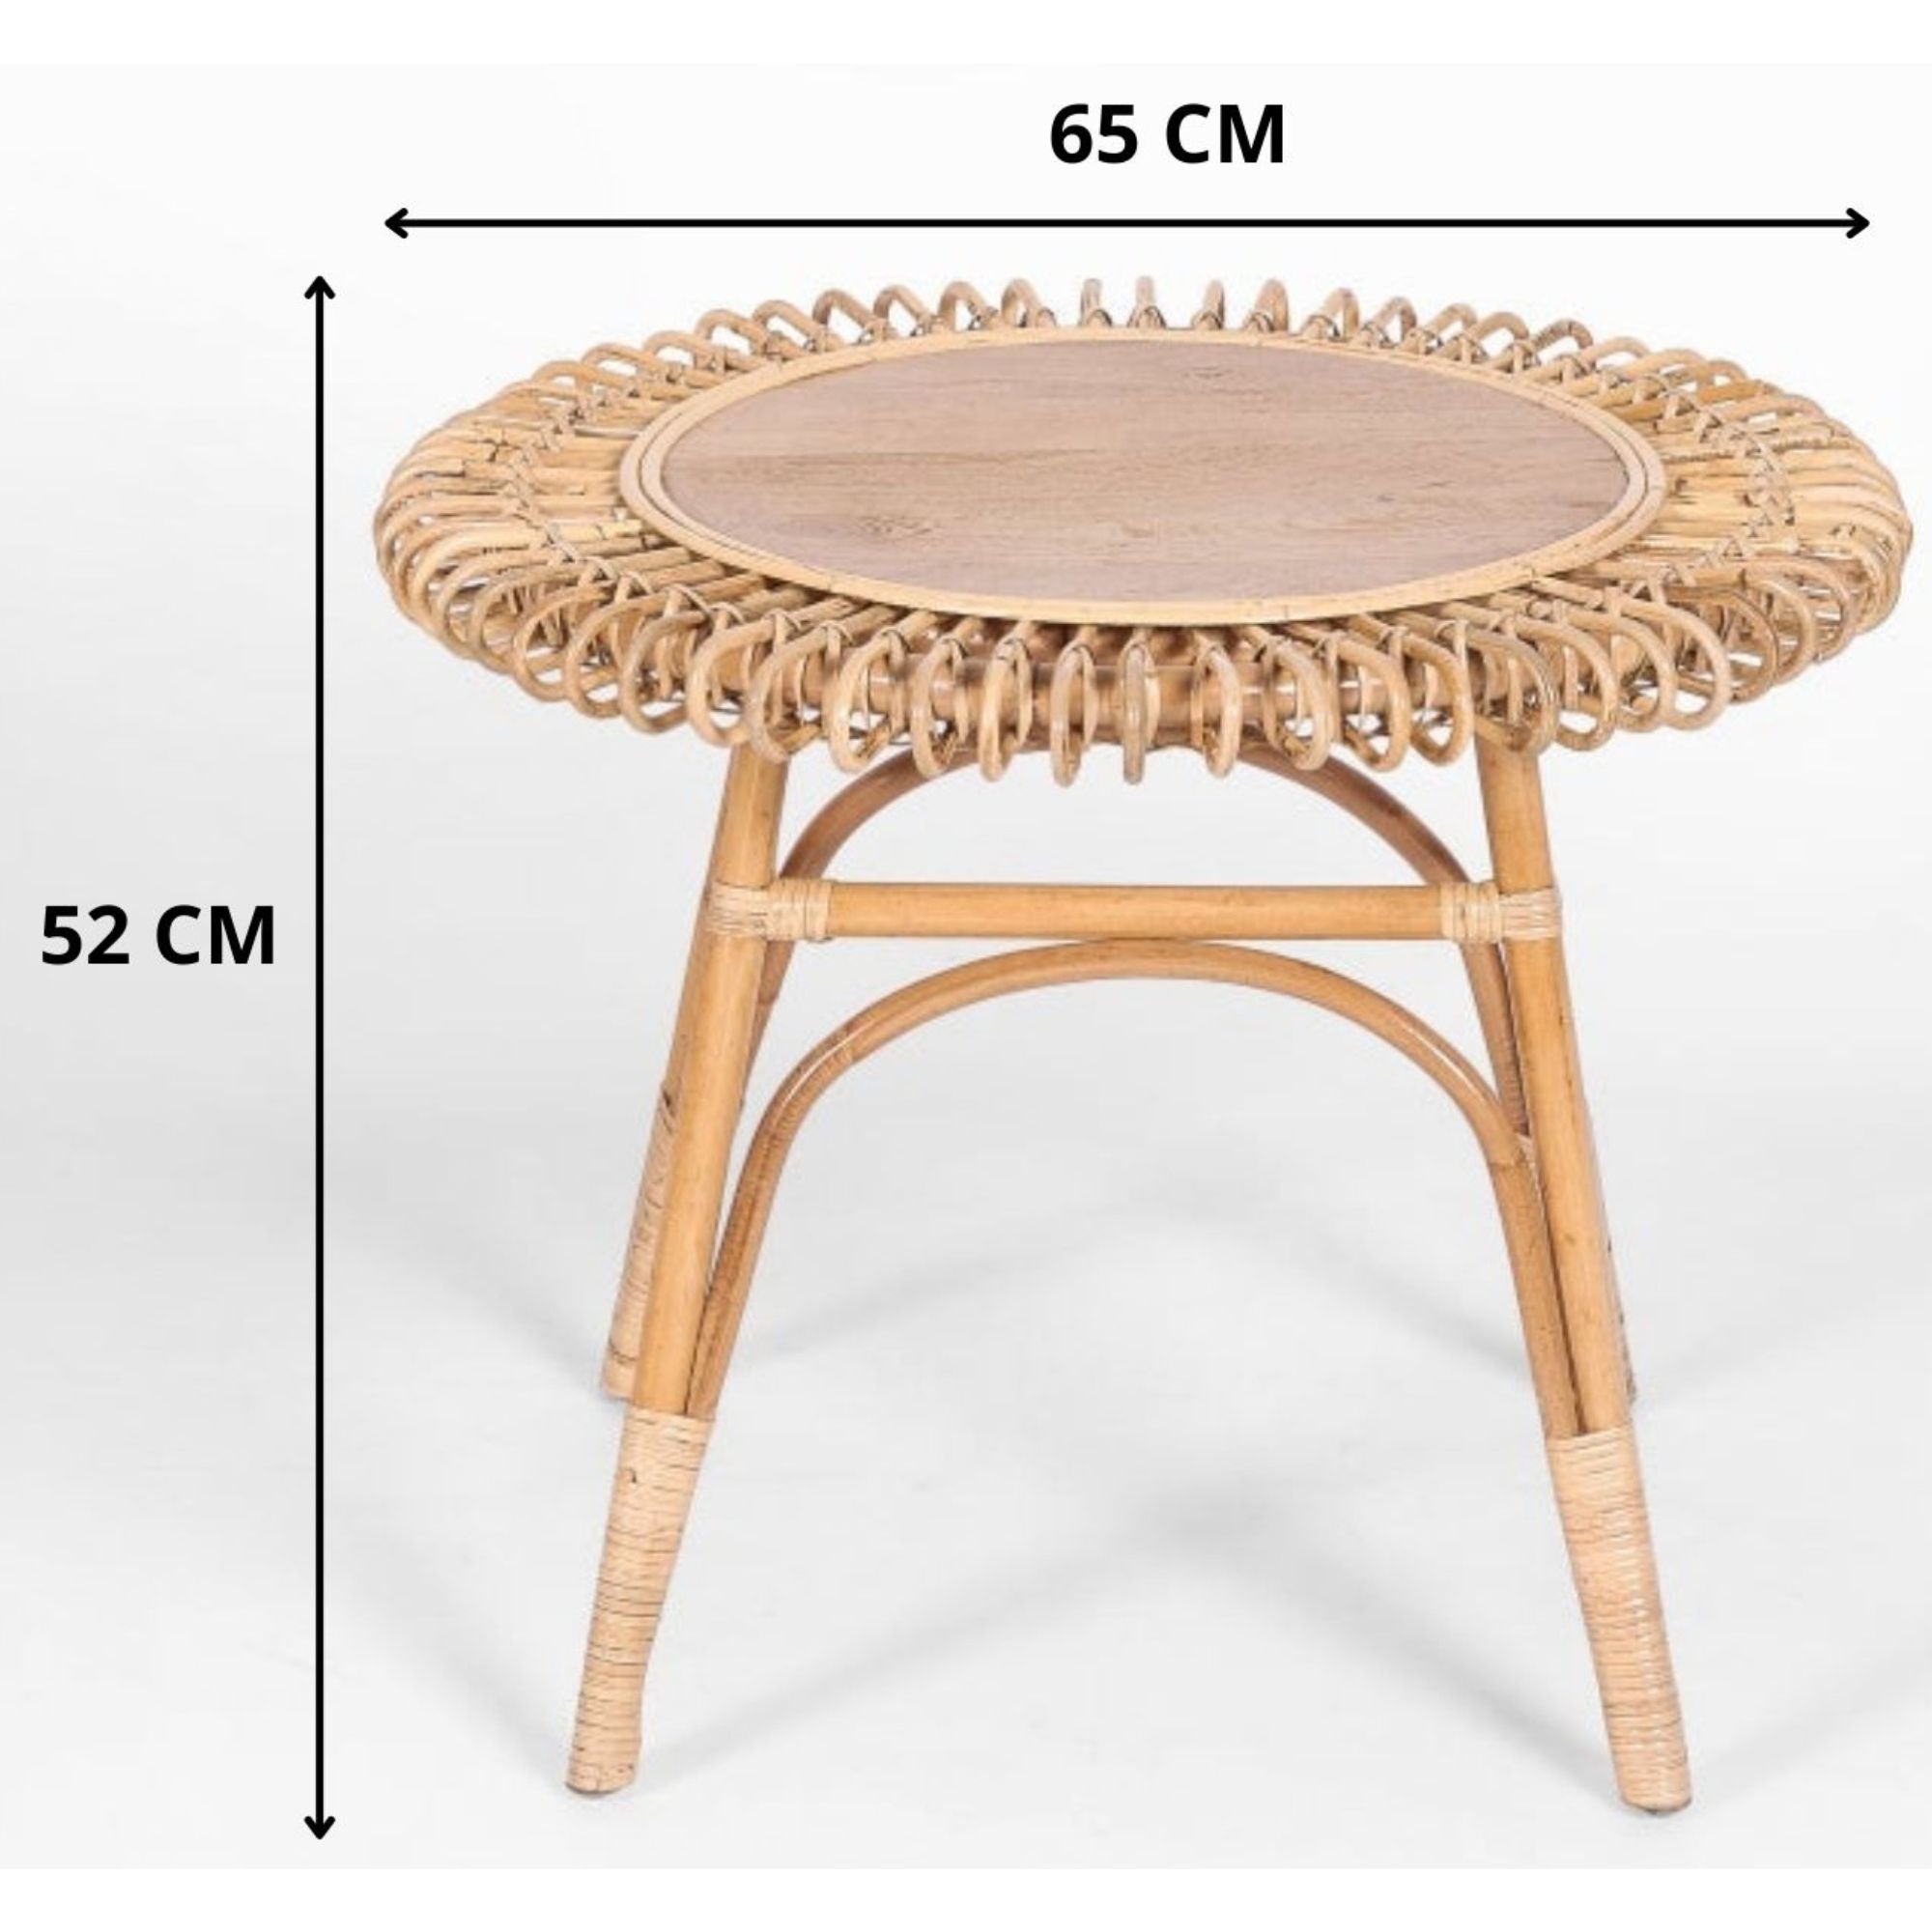 Holly 65cm Round Side Table Mango Wood Top Rattan Frame - Natural